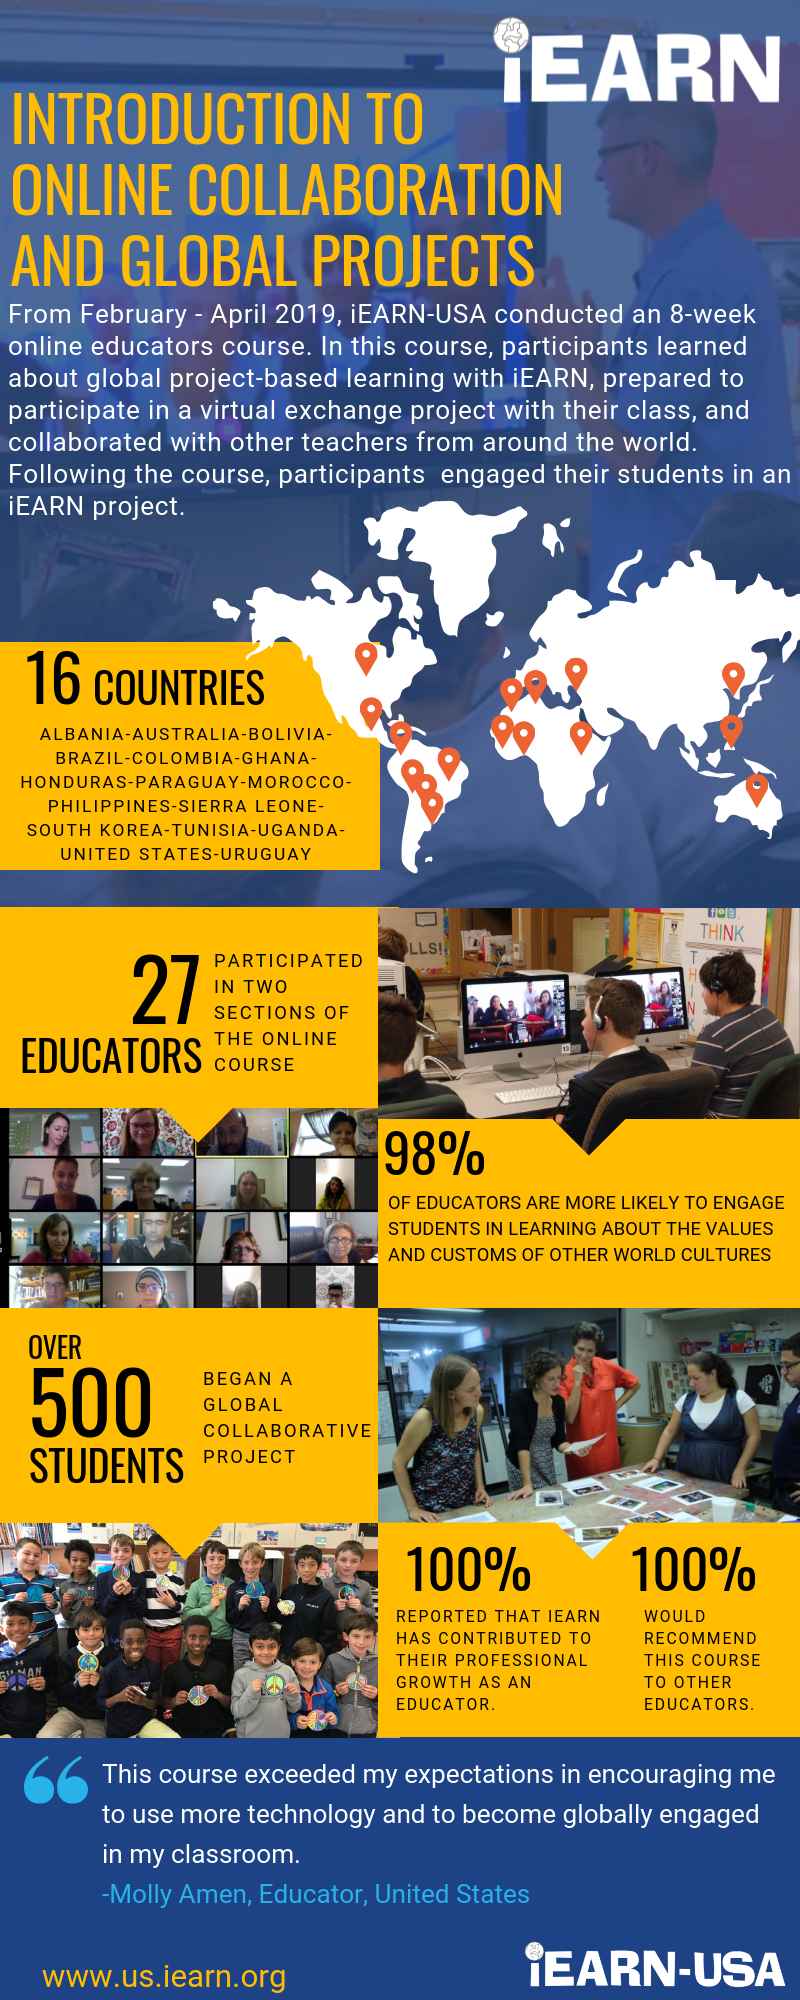 Spring 2019 Online Course Infographic